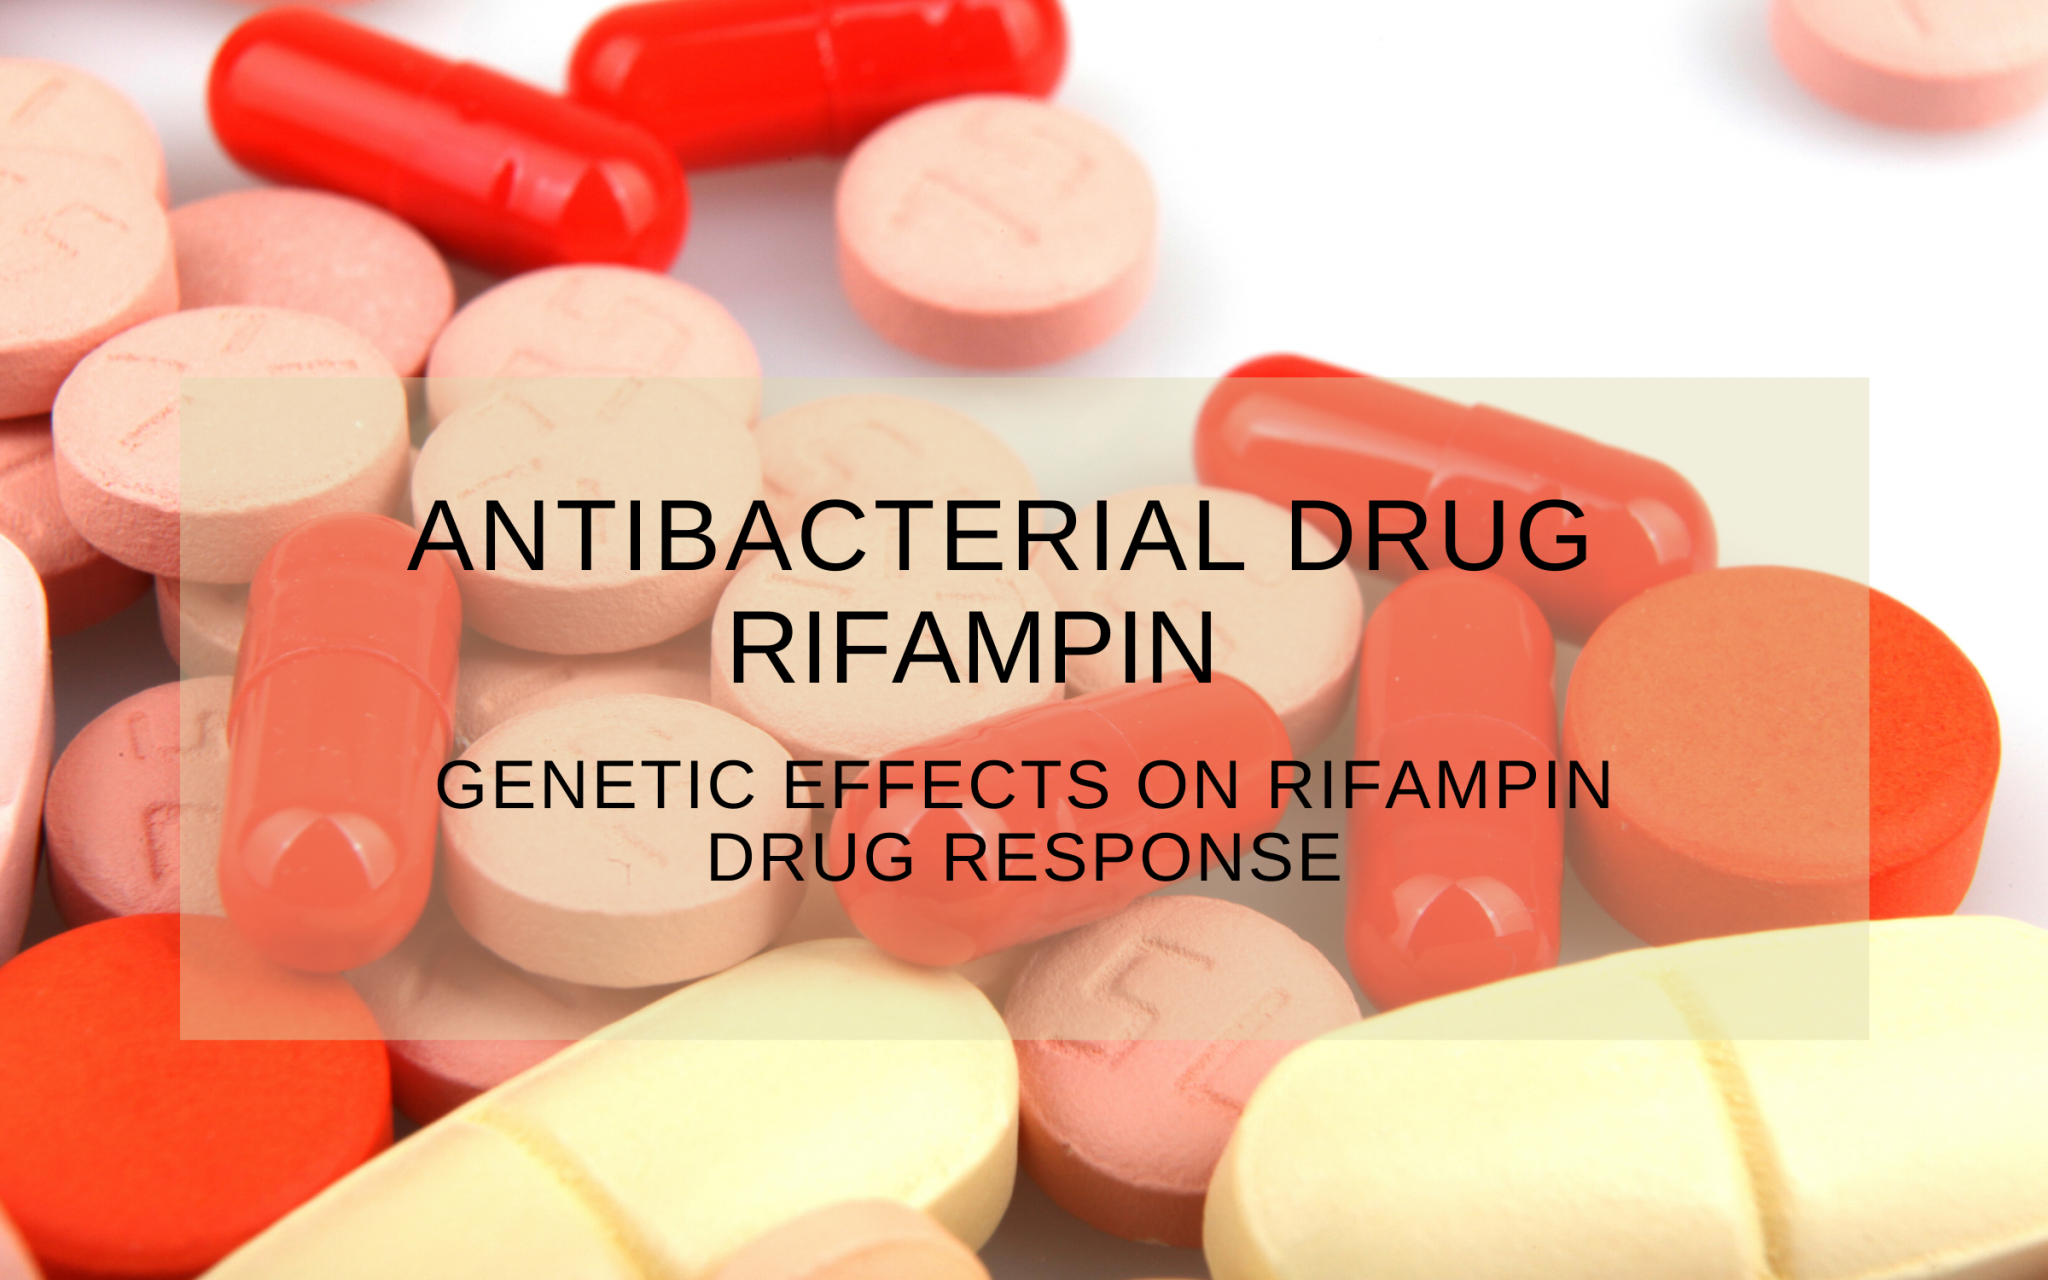 Genetic effects on Rifampin drug response